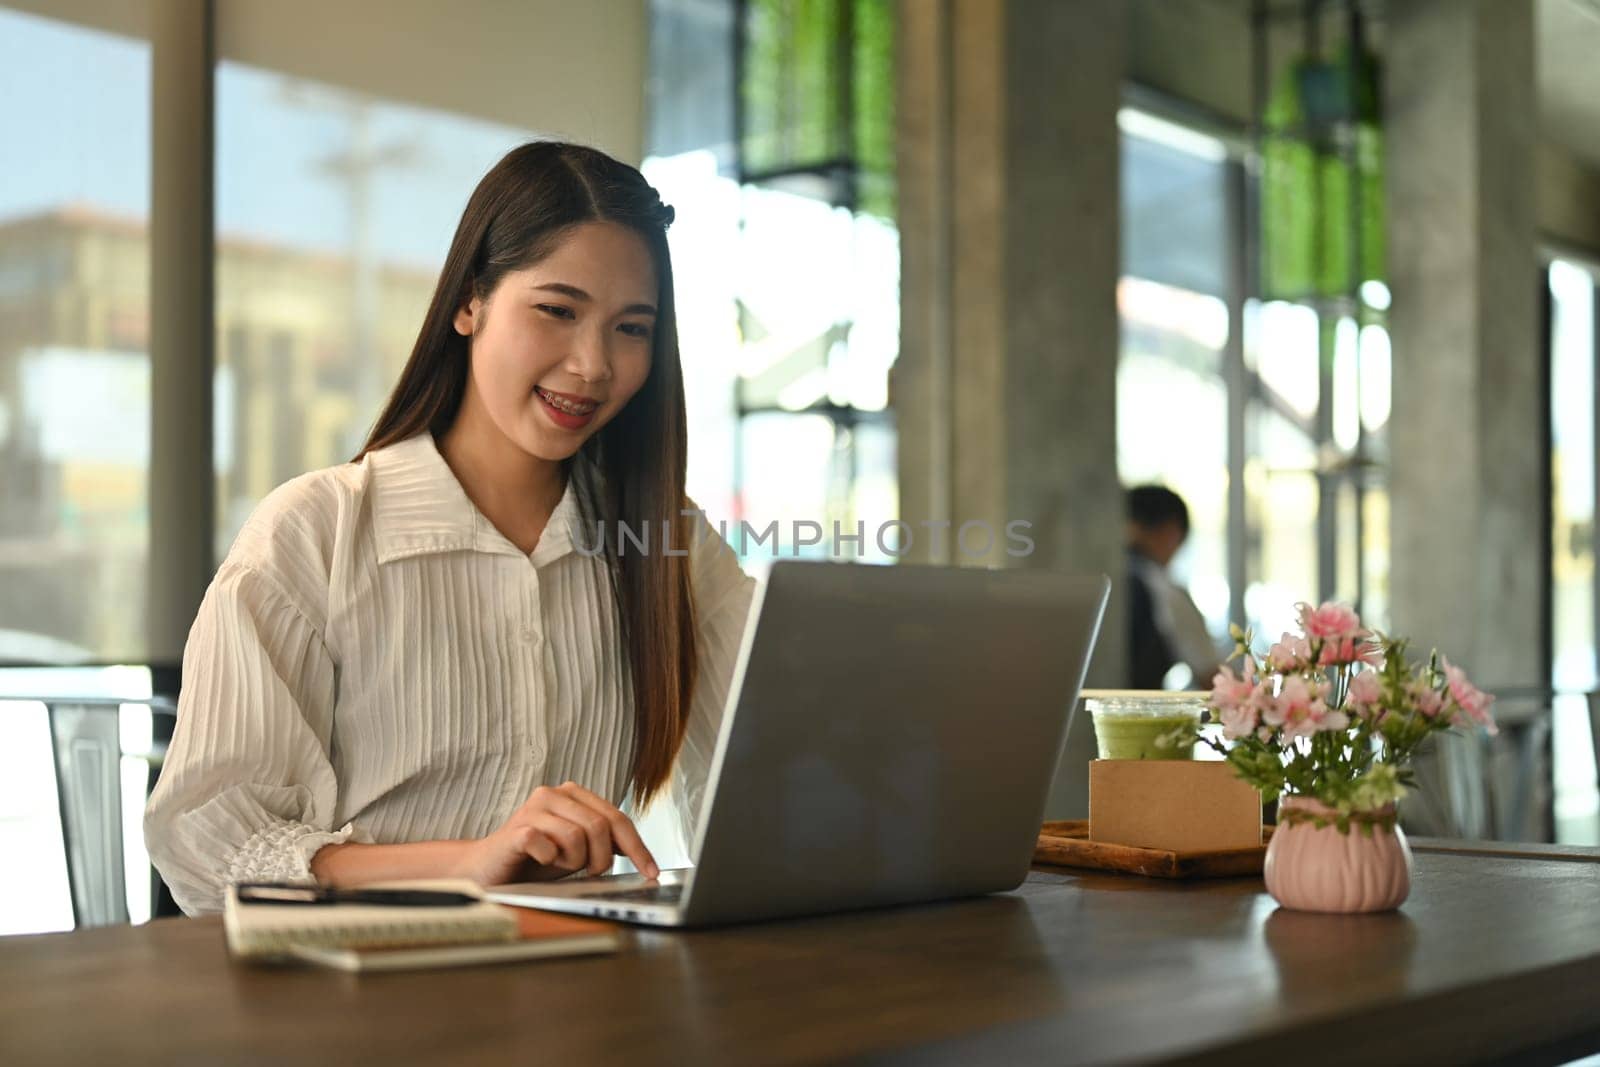 Smiling businesswoman using laptop on wooden table at coffee shop during working remotely by prathanchorruangsak